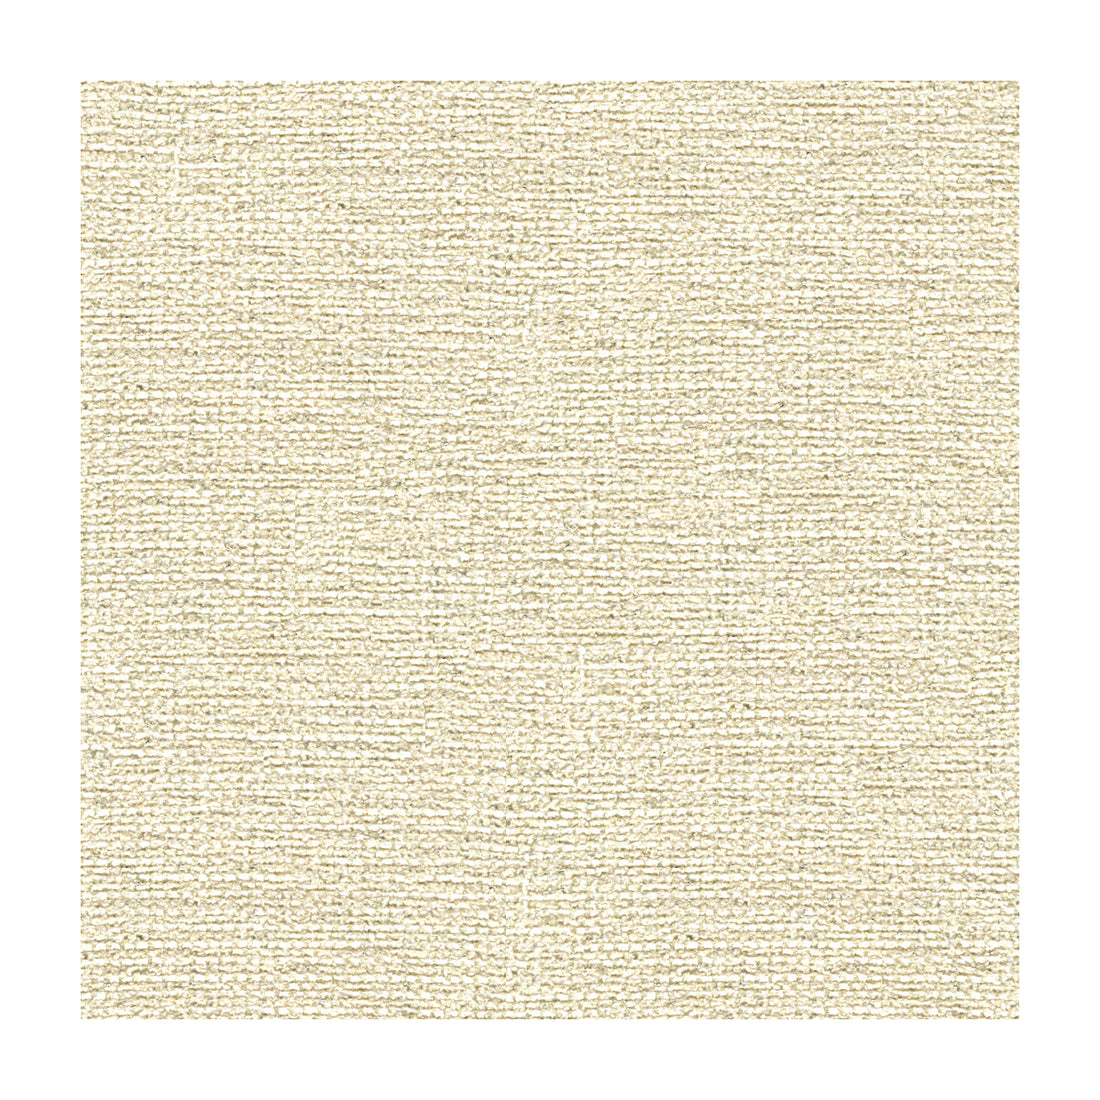 Heartbreaker fabric in vanilla color - pattern 33554.1.0 - by Kravet Couture in the Modern Luxe collection